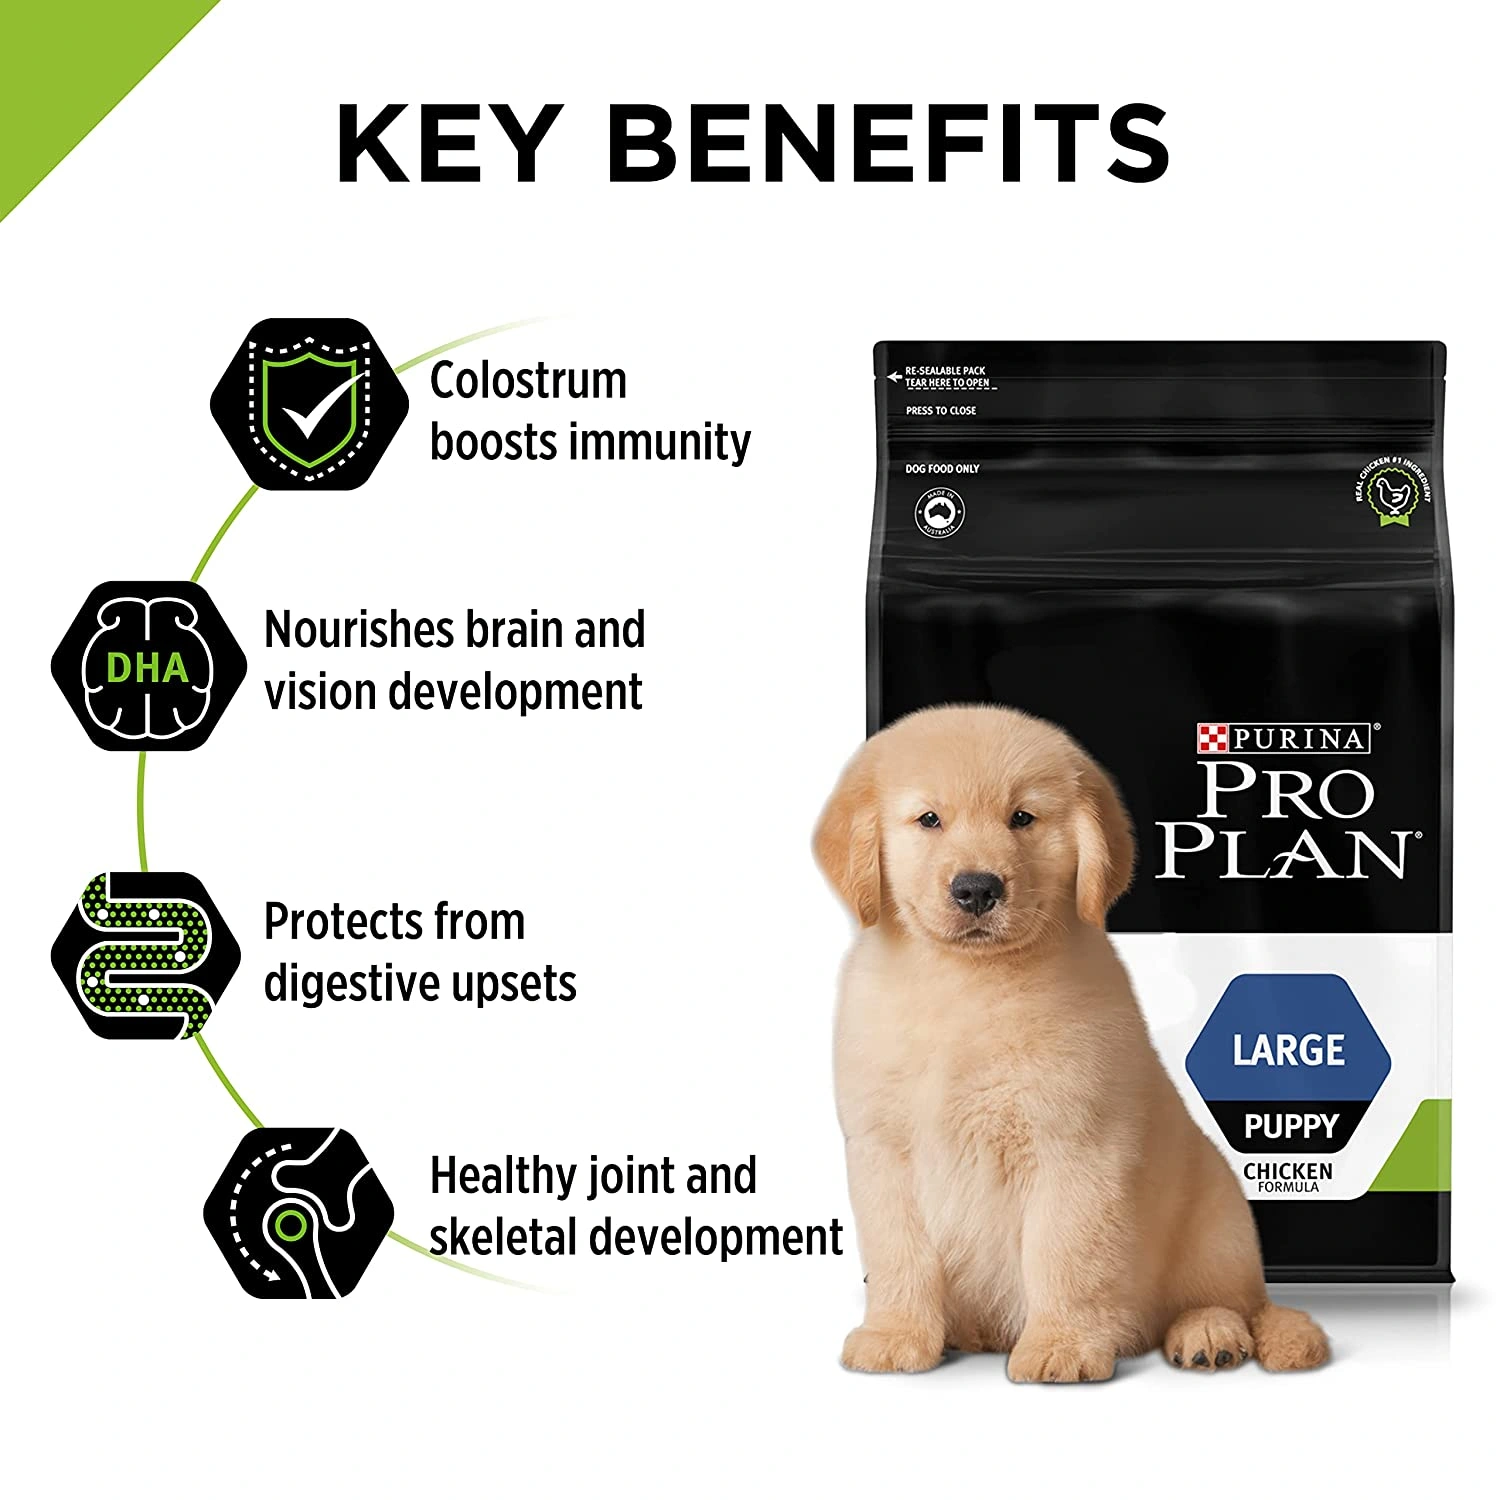 PURINA PRO PLAN Puppy Dry Dog Food for Large Breed 2.5kg-2